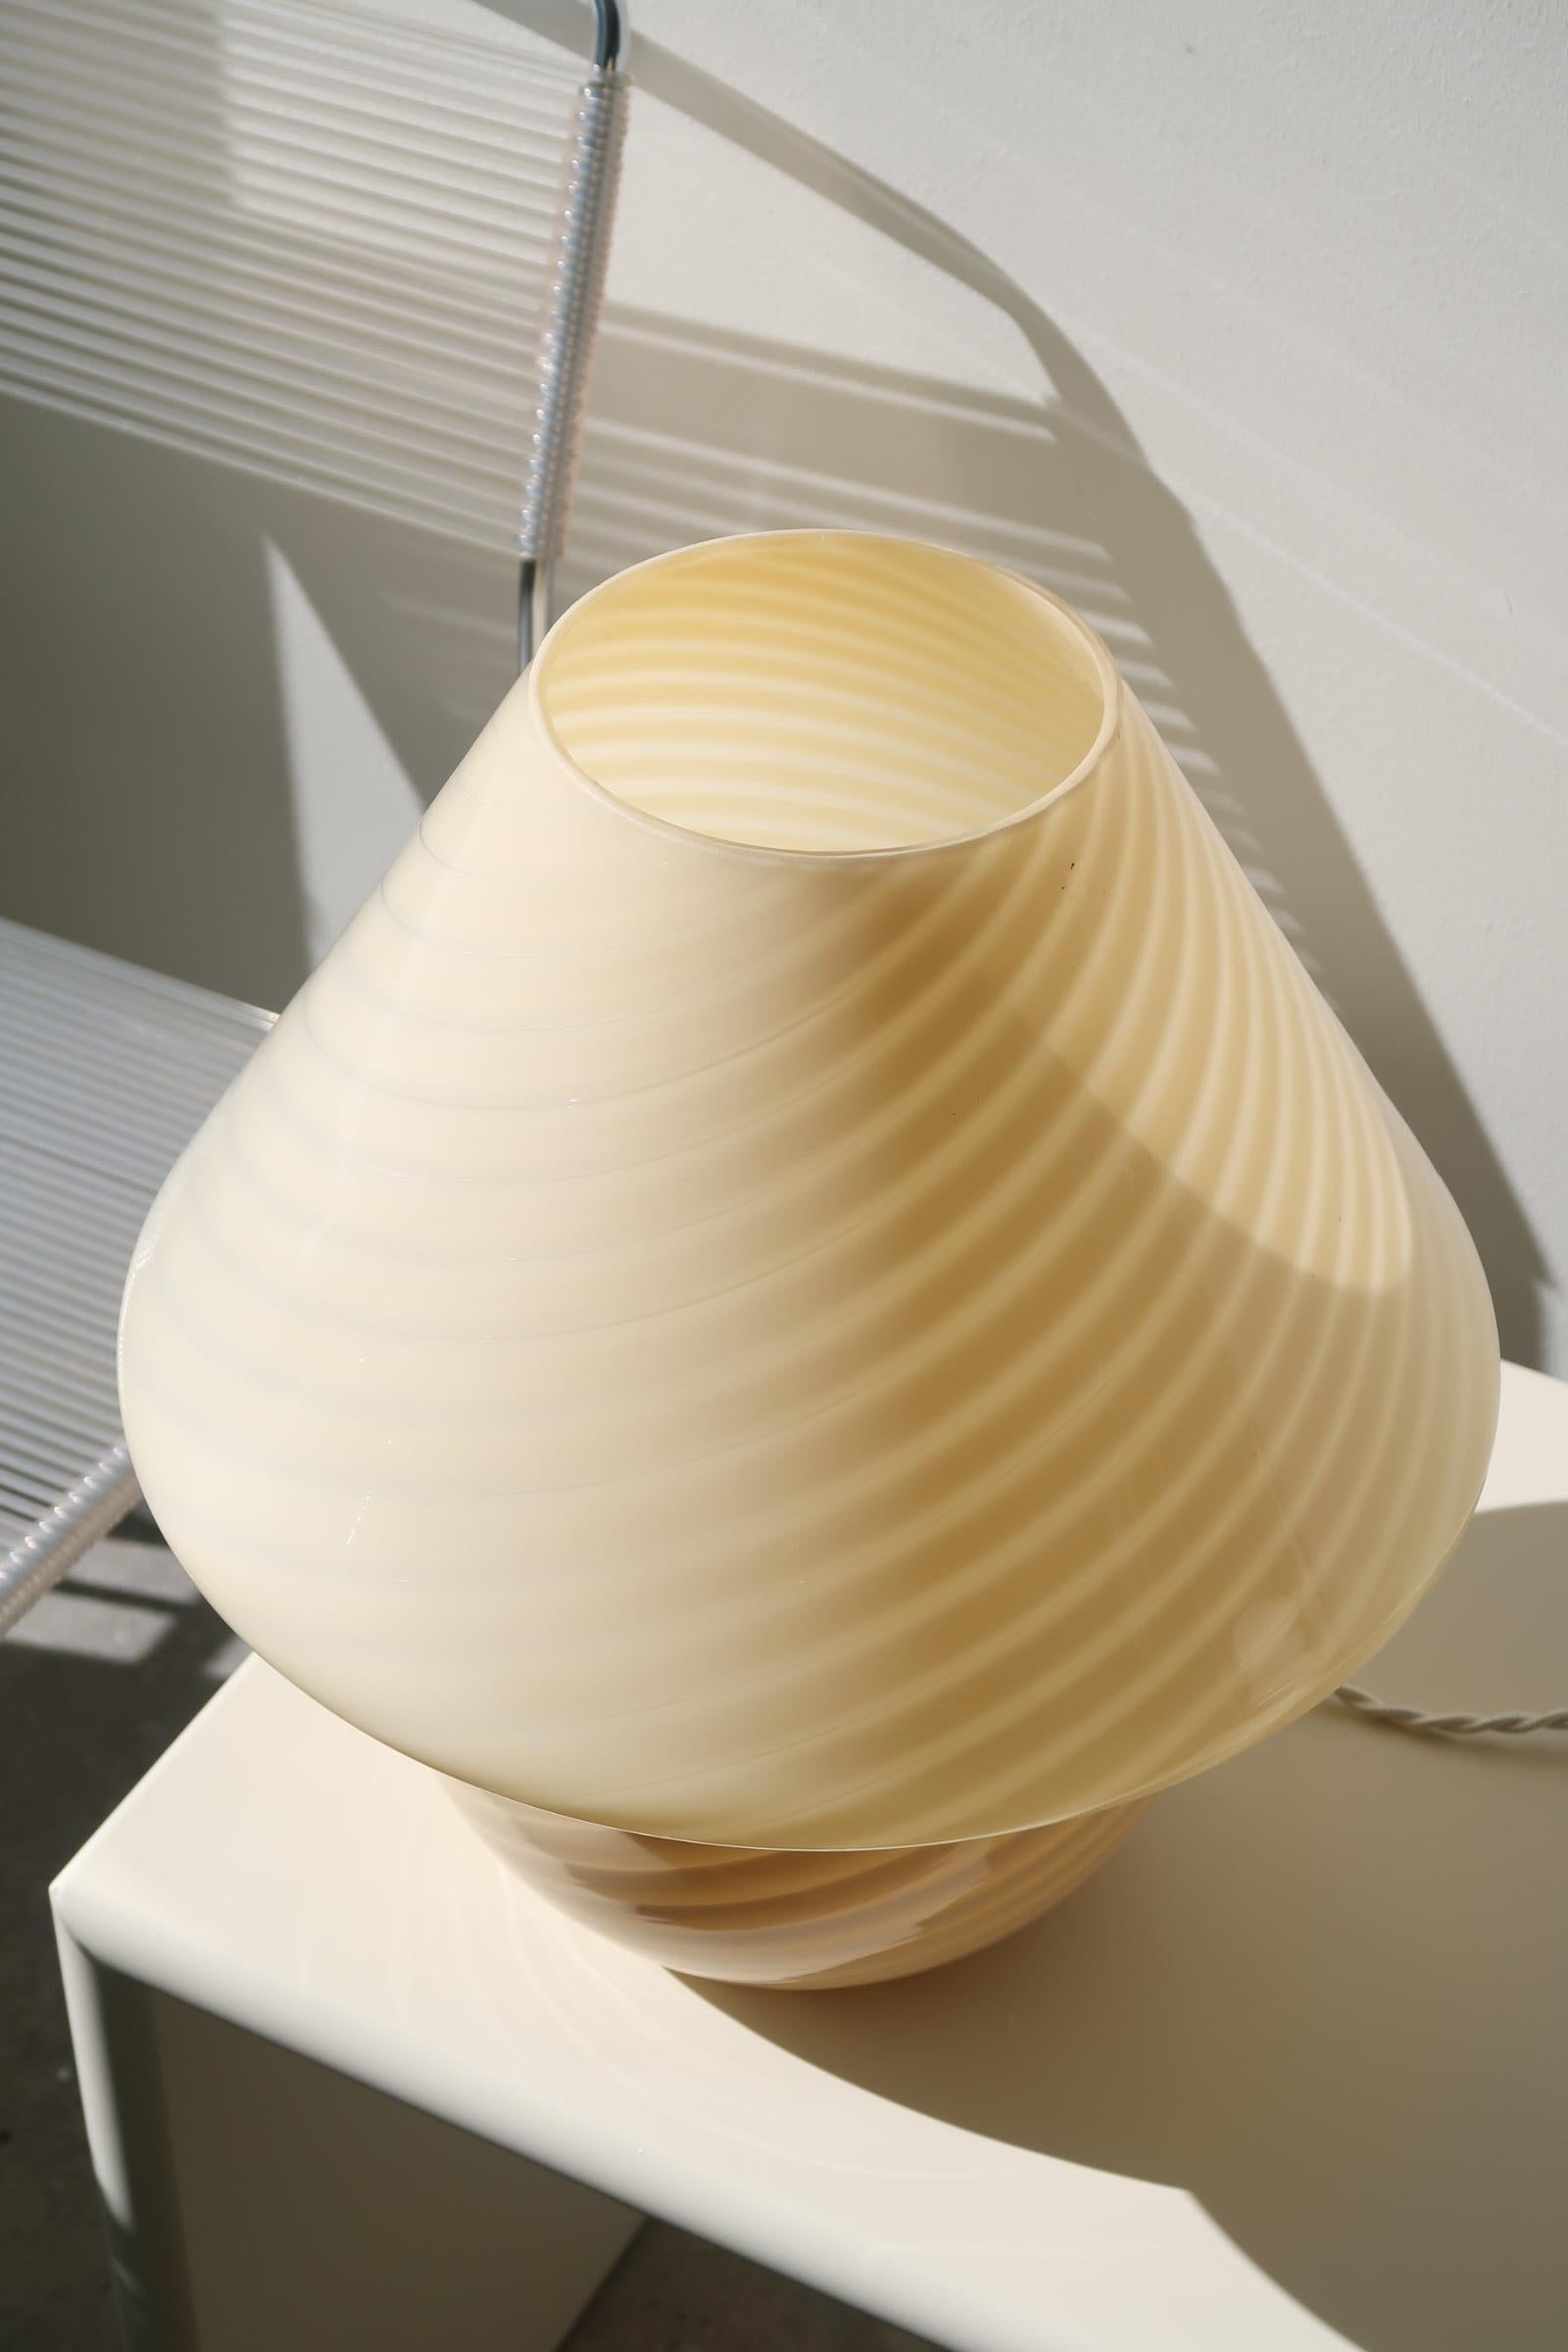 Extra Large Vintage Murano Mushroom Lamp Yellow Swirl Italian 1970s Mouth Blown In Good Condition For Sale In Copenhagen, DK